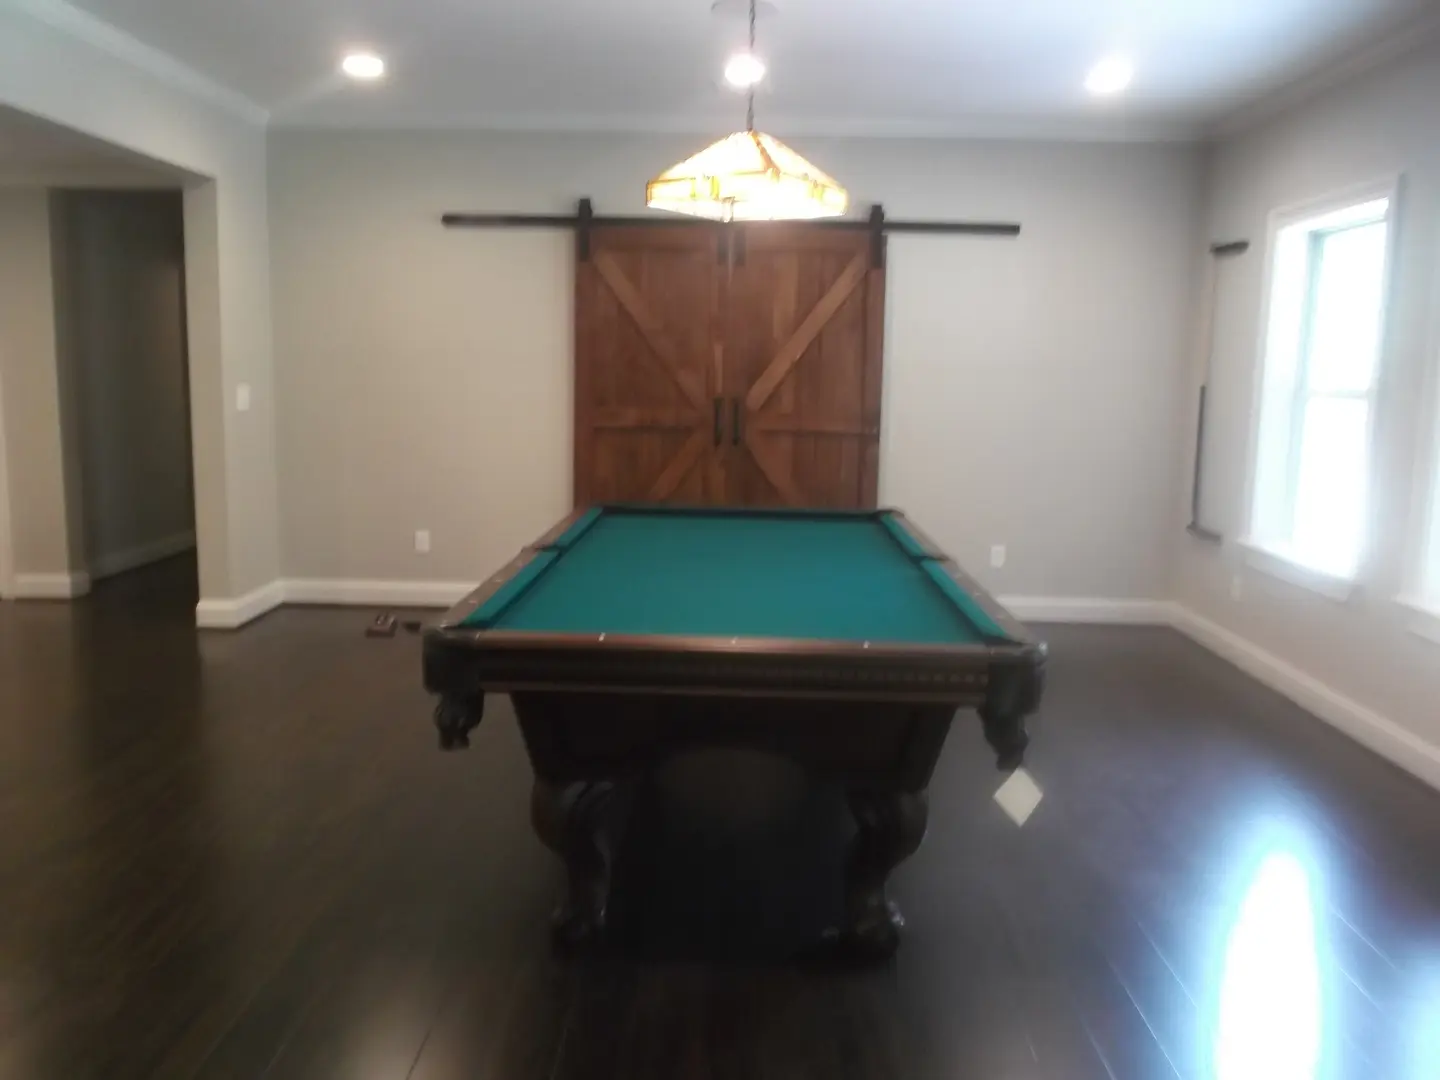 A pool table in the middle of a room.